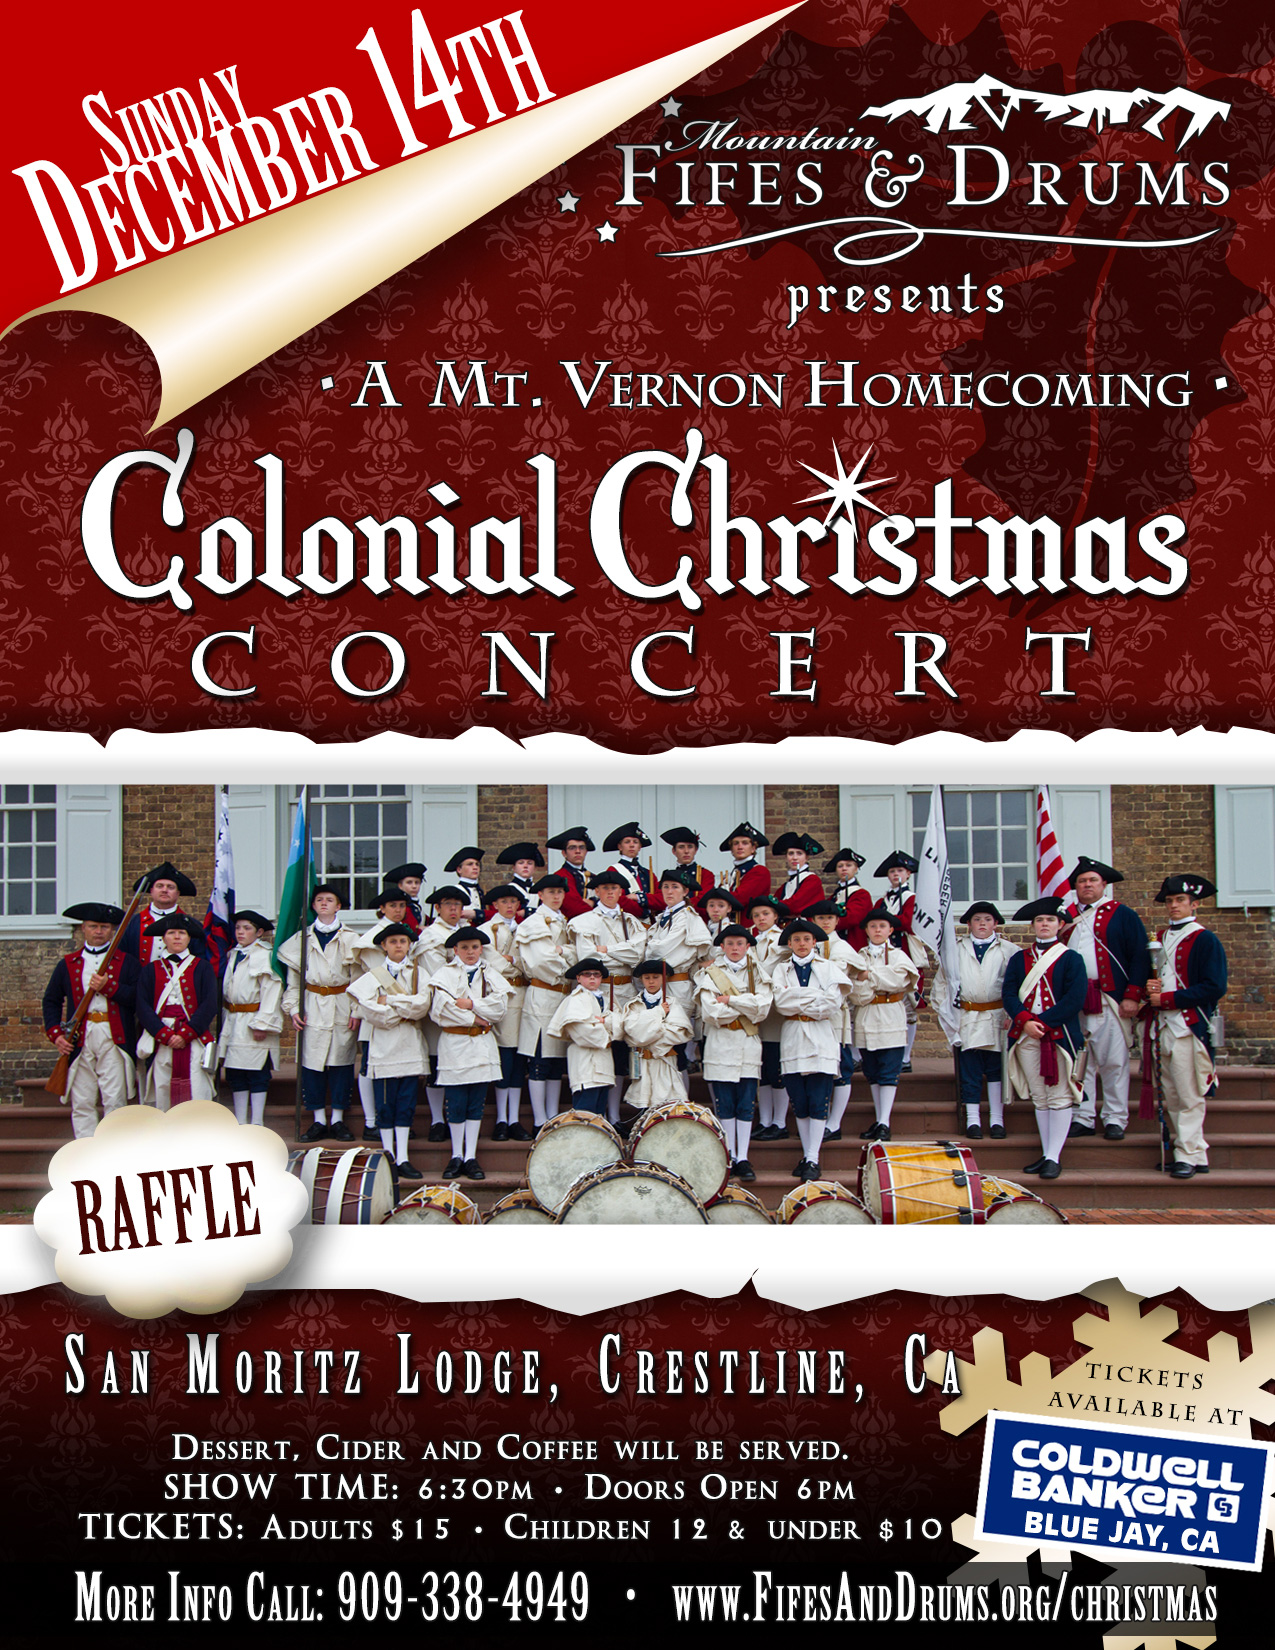 Colonial Christmas Concert | Mountain Fifes & Drums